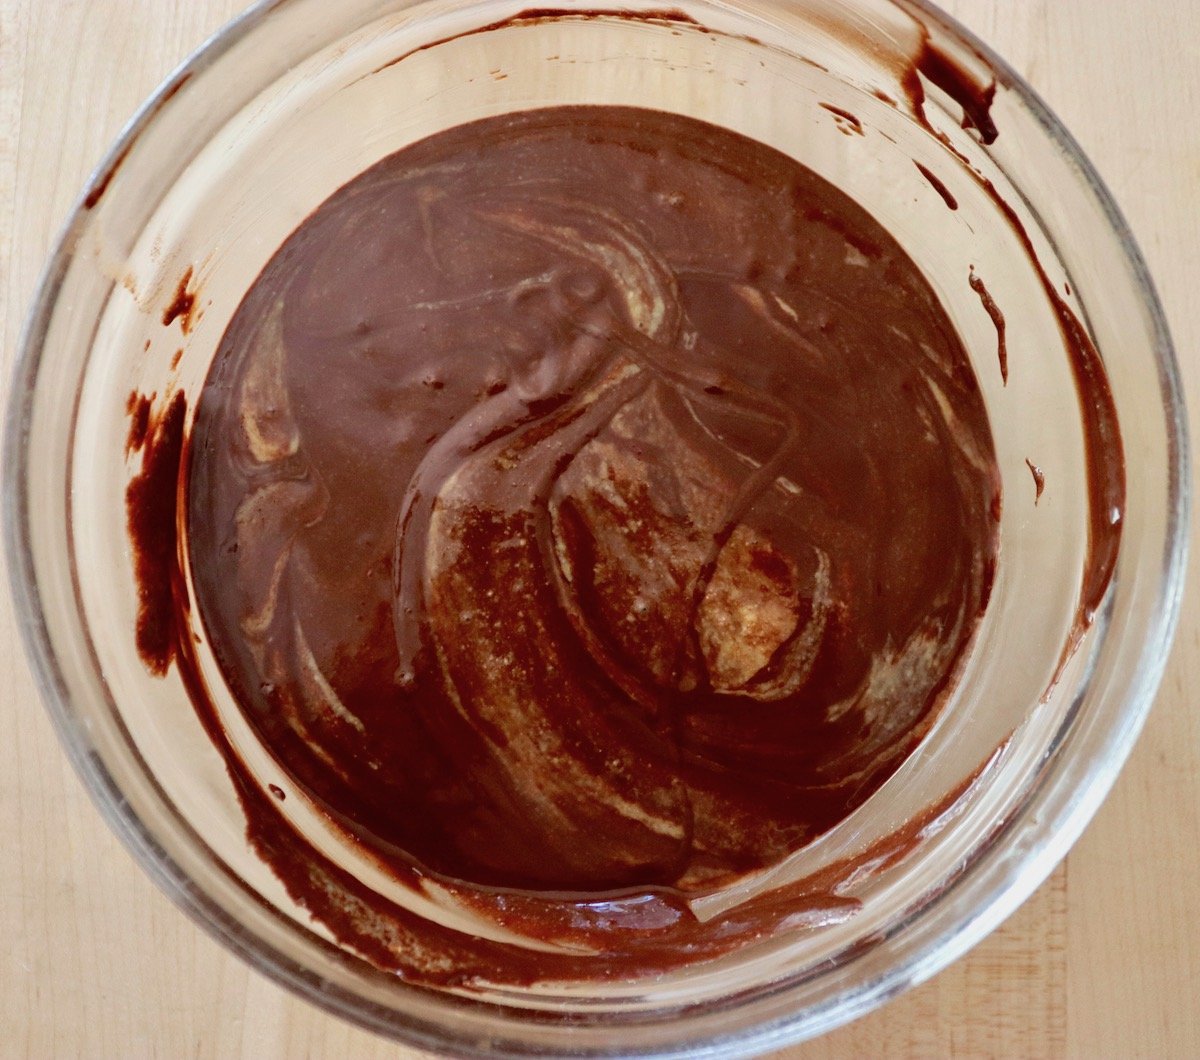 Mixture of chocolate ganache and sesame paste in a glass bowl.